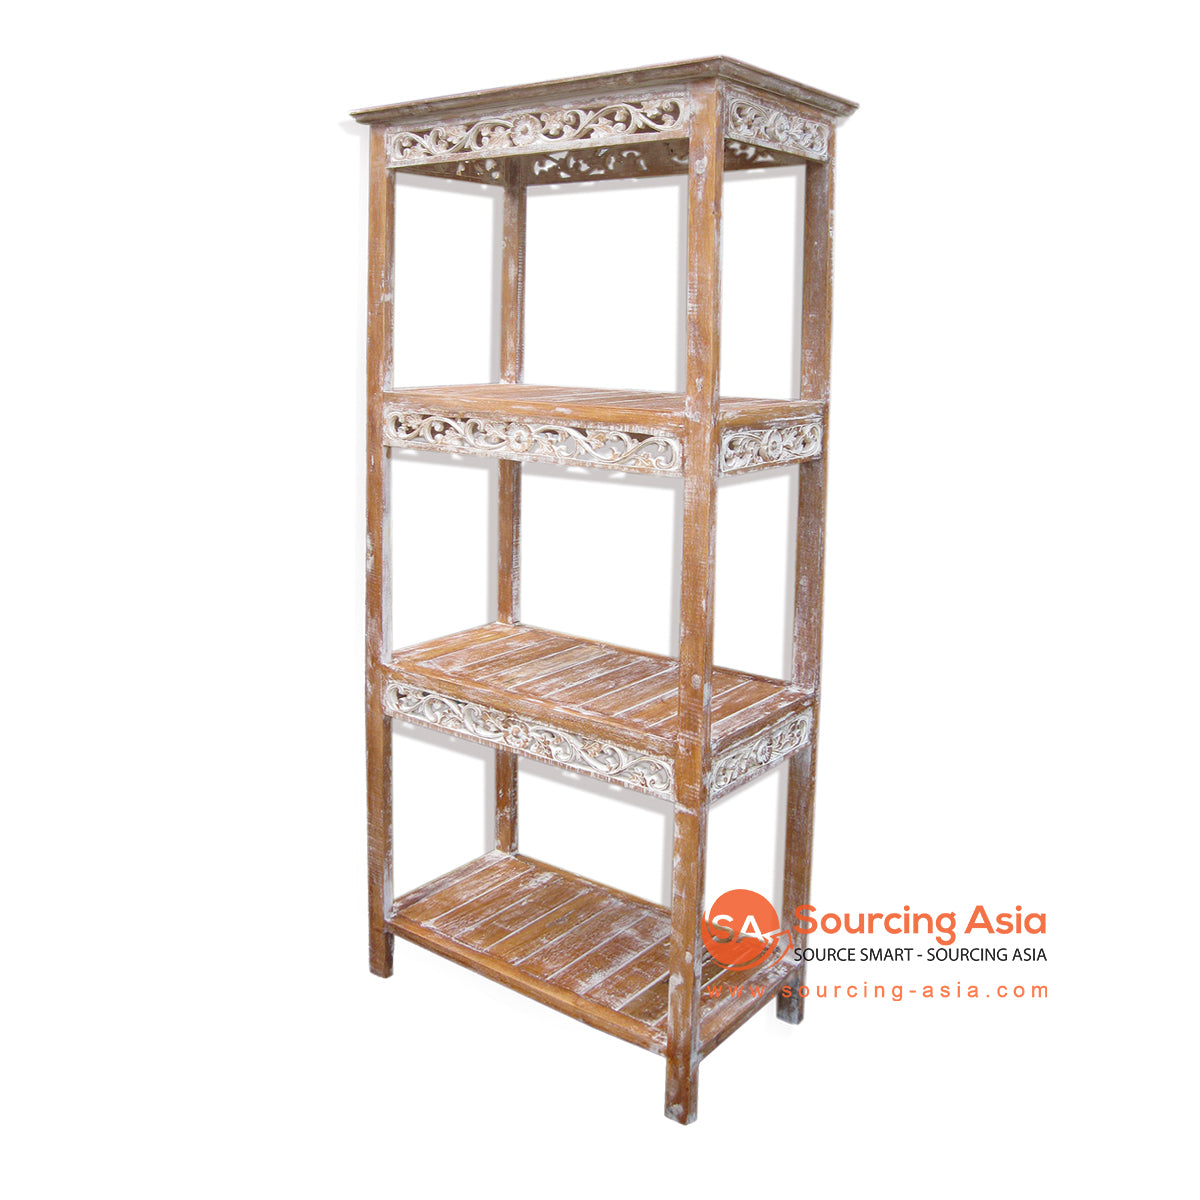 THE078-1 BROWN WASH WOODEN BOOK SHELF WITH THREE SLOTS